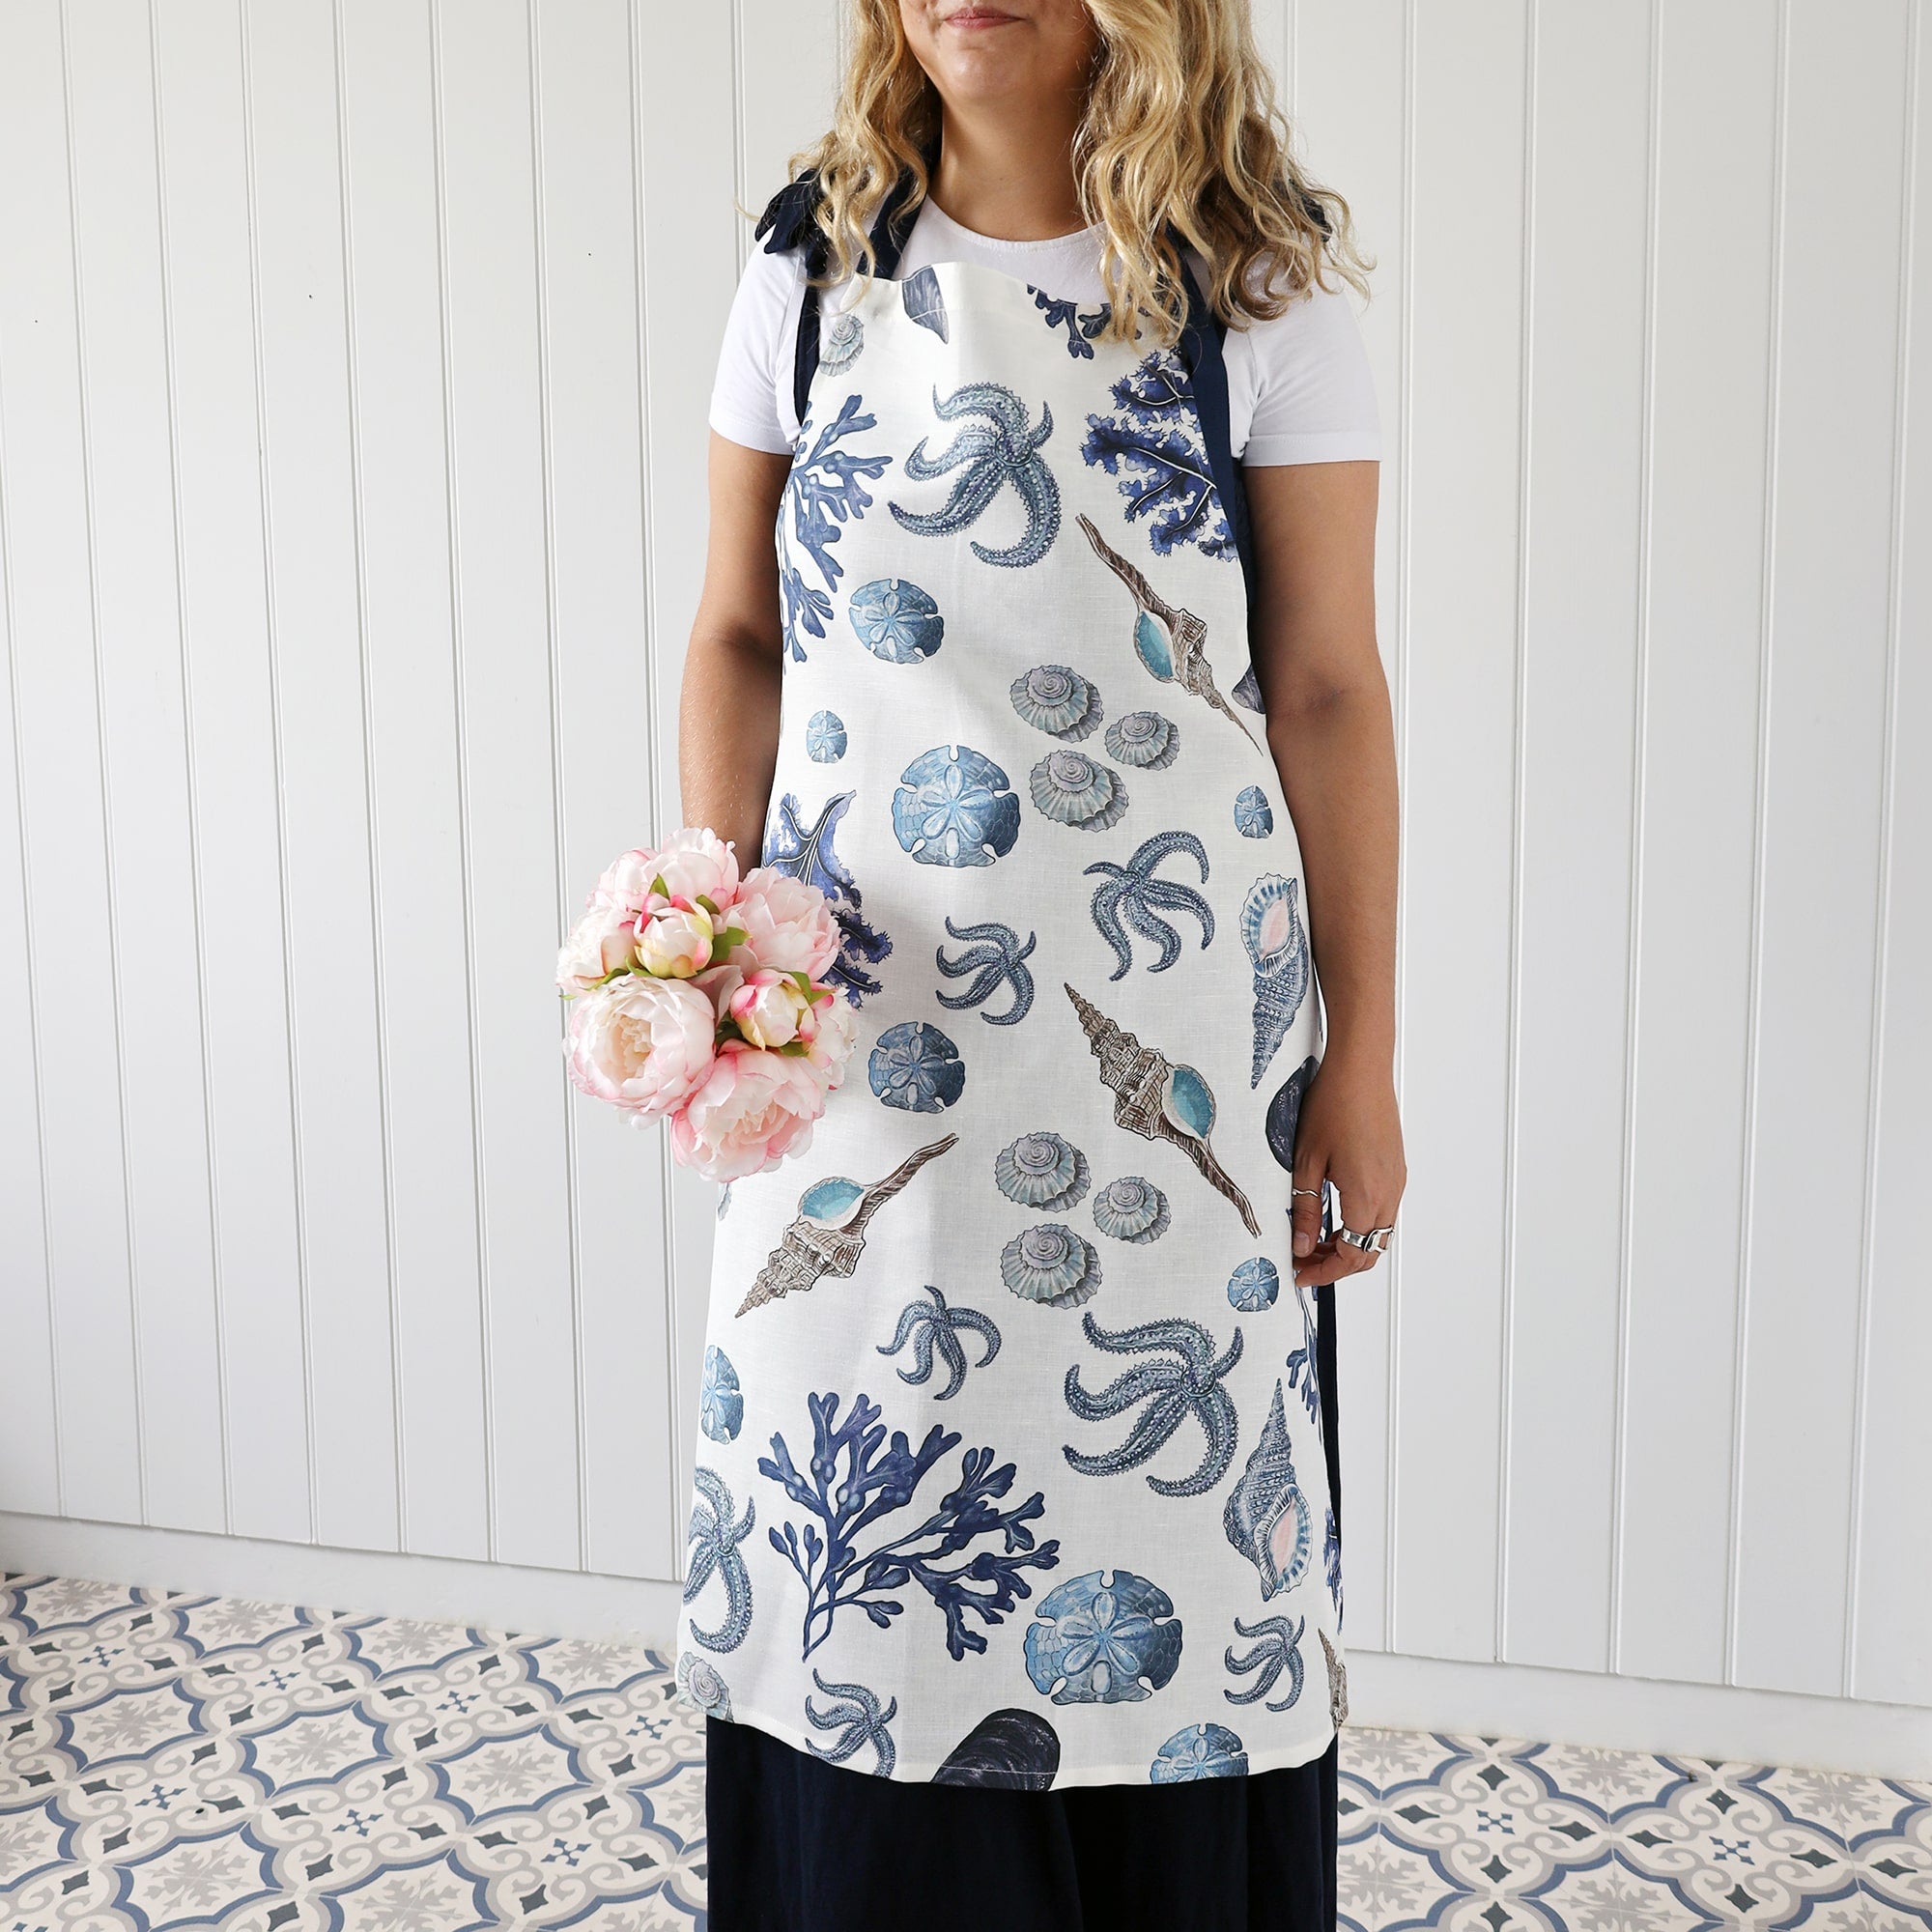 Our beachcomber apron being worn by a model who is also holding a small bouquet of flowers.